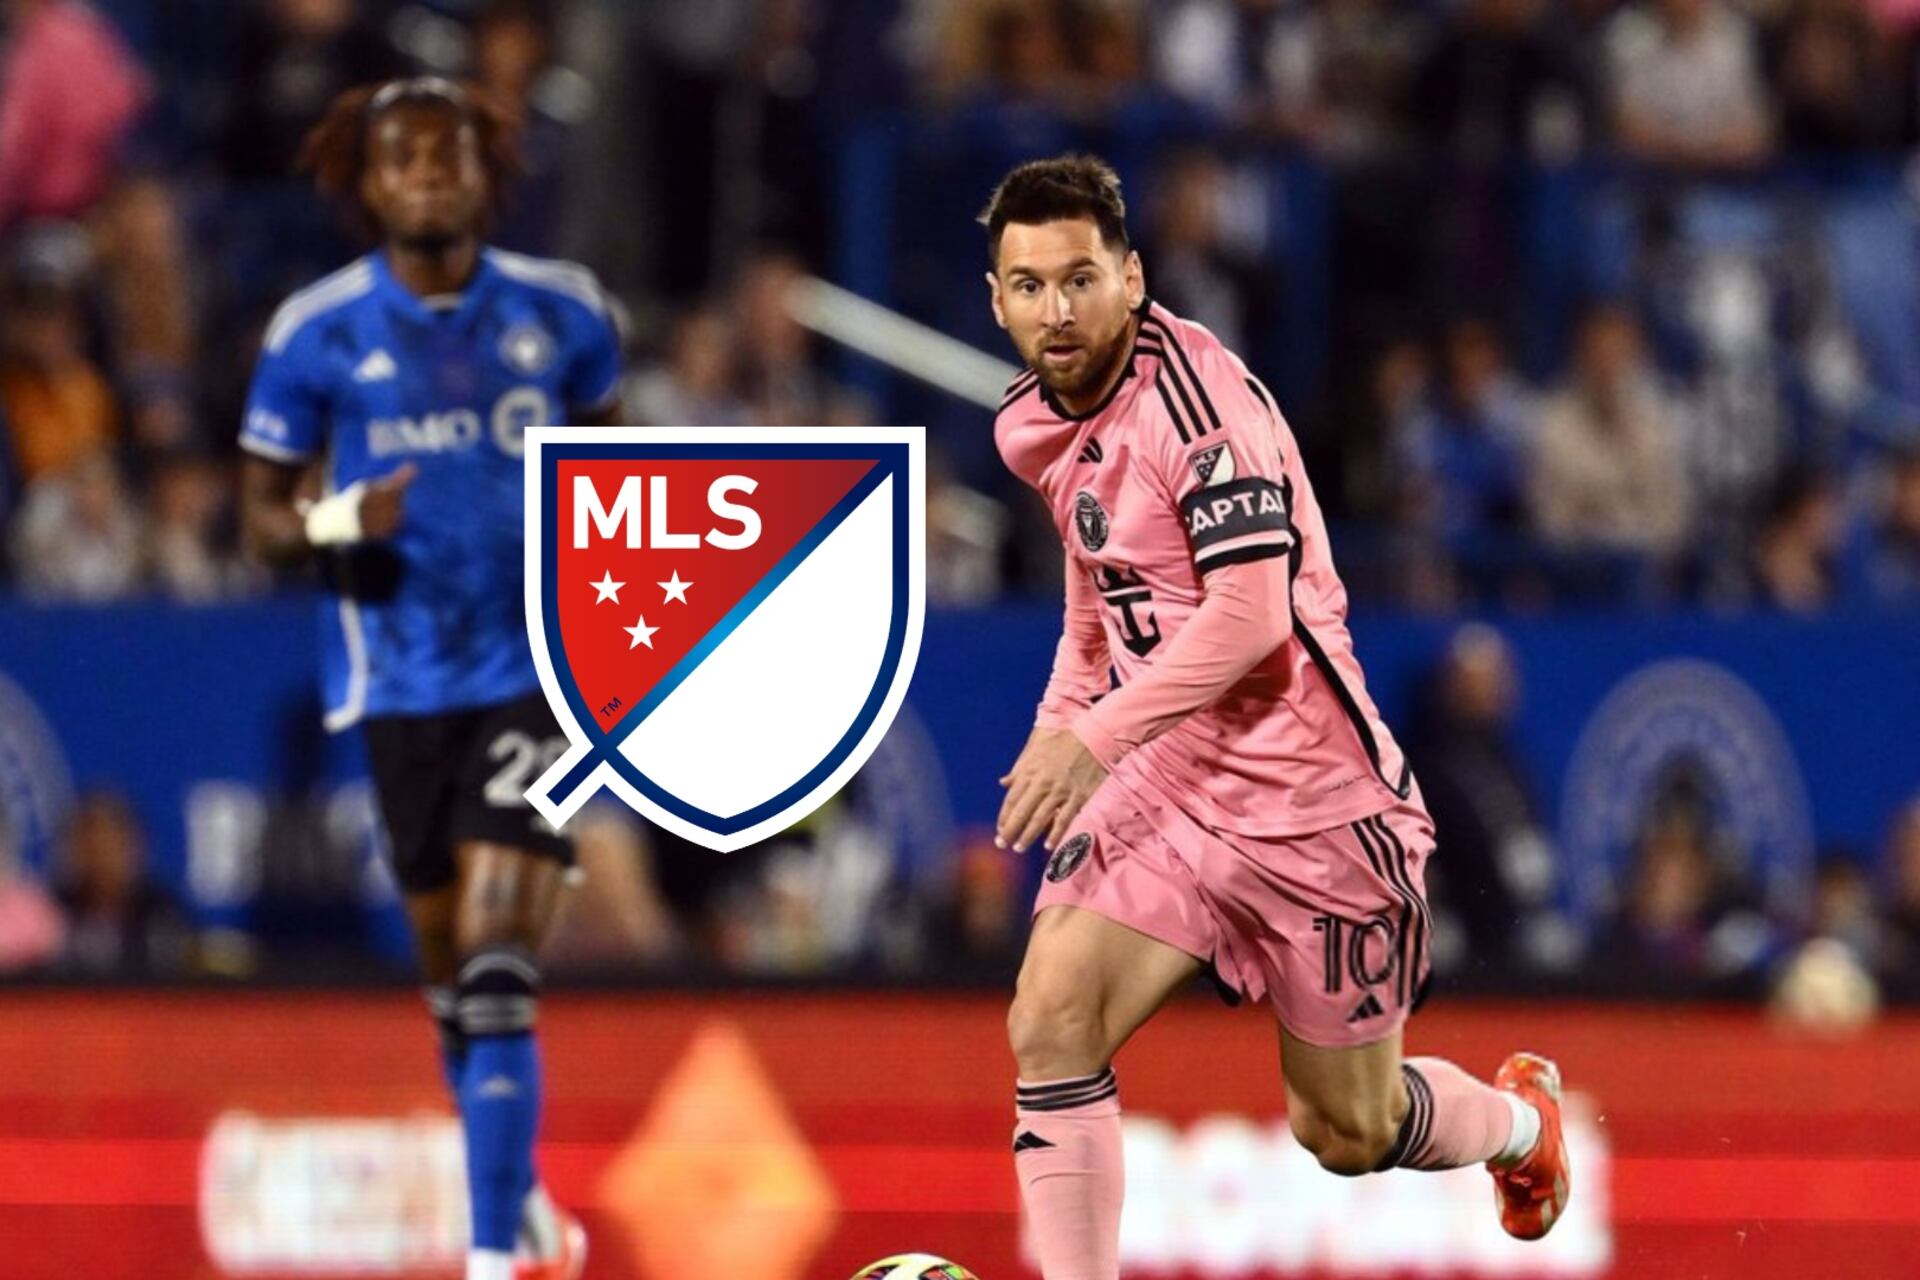 (VIDEO) Messi was angry, the harsh comment of Messi about the MLS which could bring him consequences